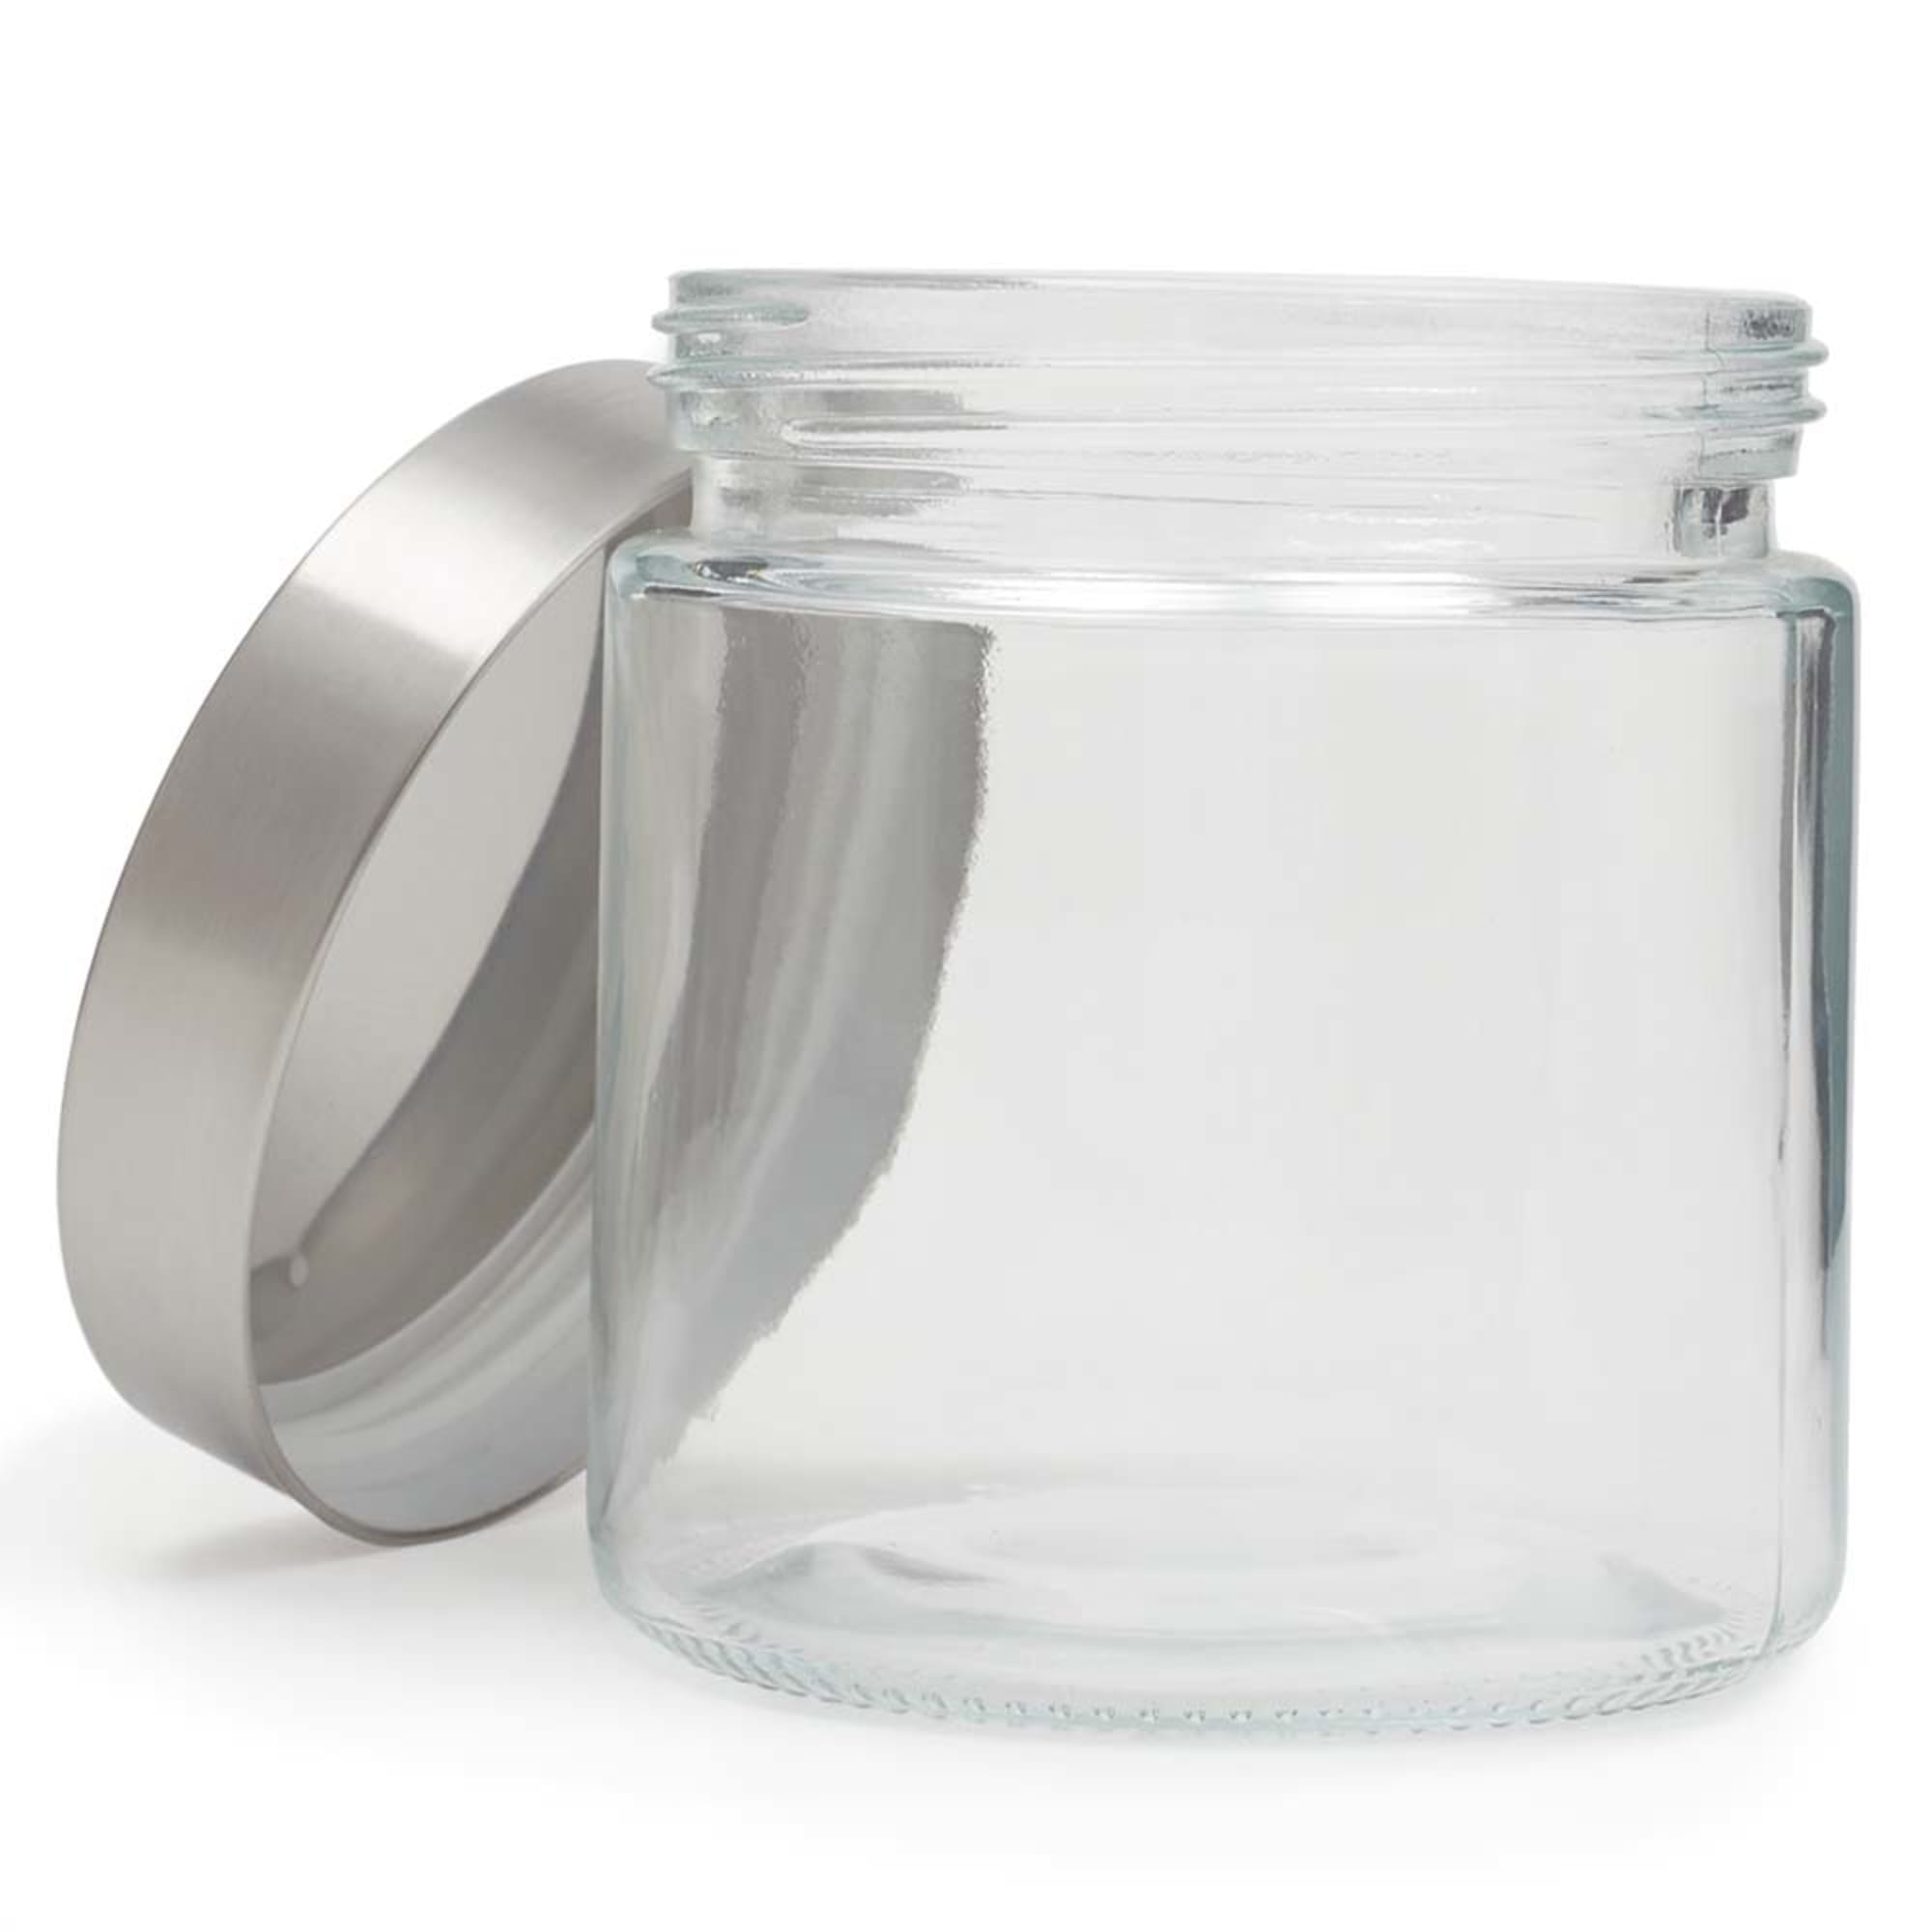 Home Basics Small 25 oz. Round Glass Canister with Air-Tight Stainless Steel Twist Top Lid, Clear $2.00 EACH, CASE PACK OF 24